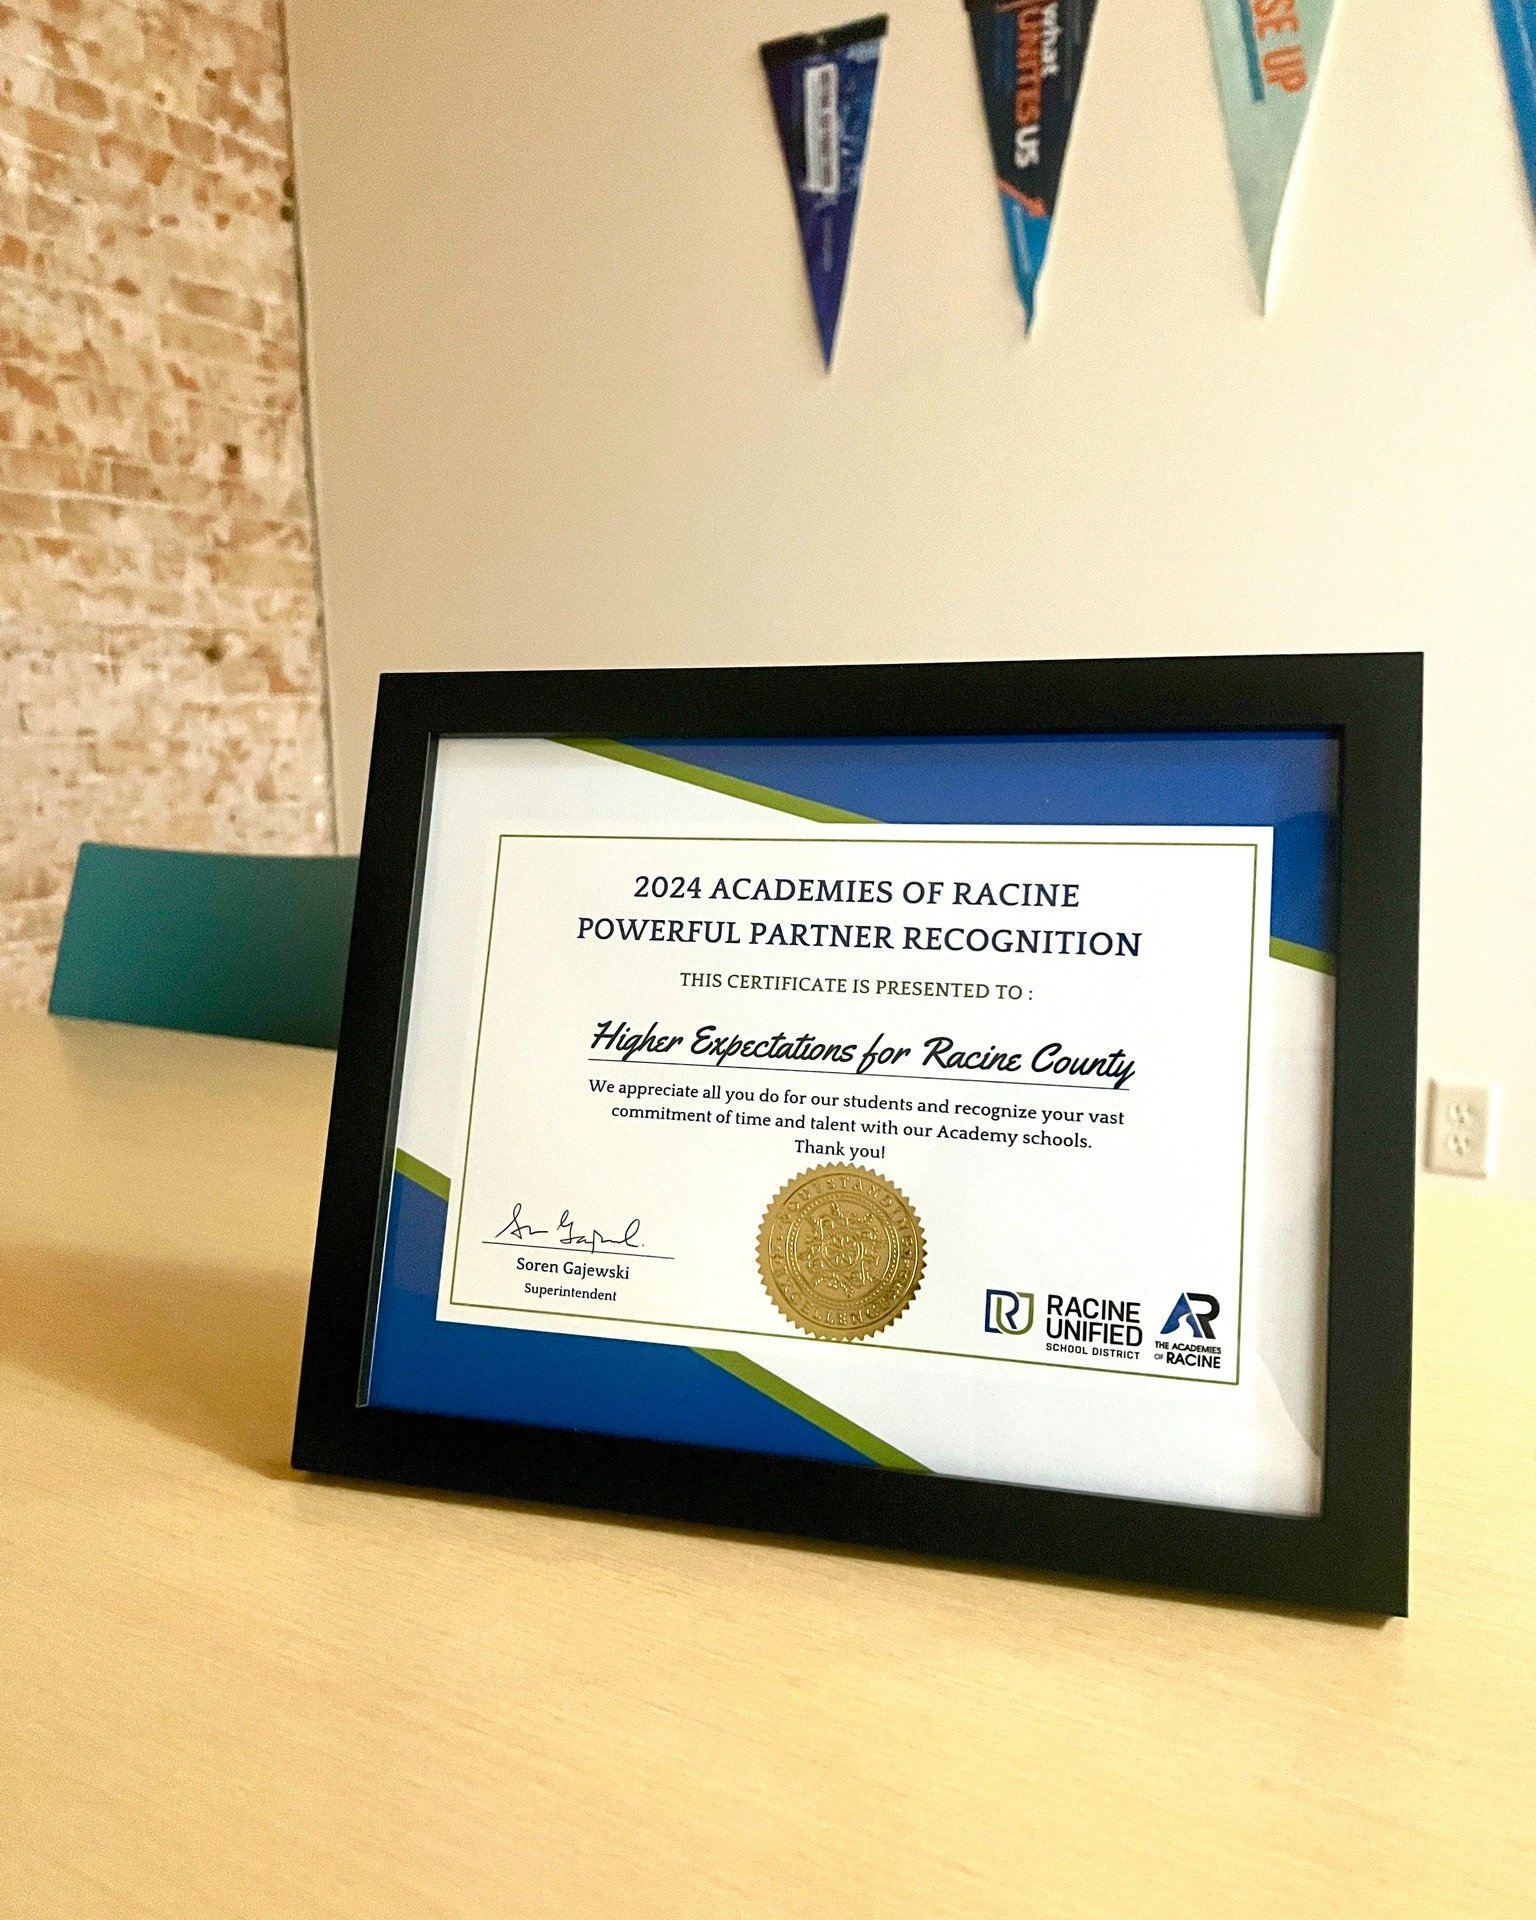 We're excited to share that Higher Expectations for Racine County was awarded the 2024 Academies of Racine Powerful Partner Recognition by @racineunified. We're proud to stand alongside our community in supporting education and fostering success. Tha